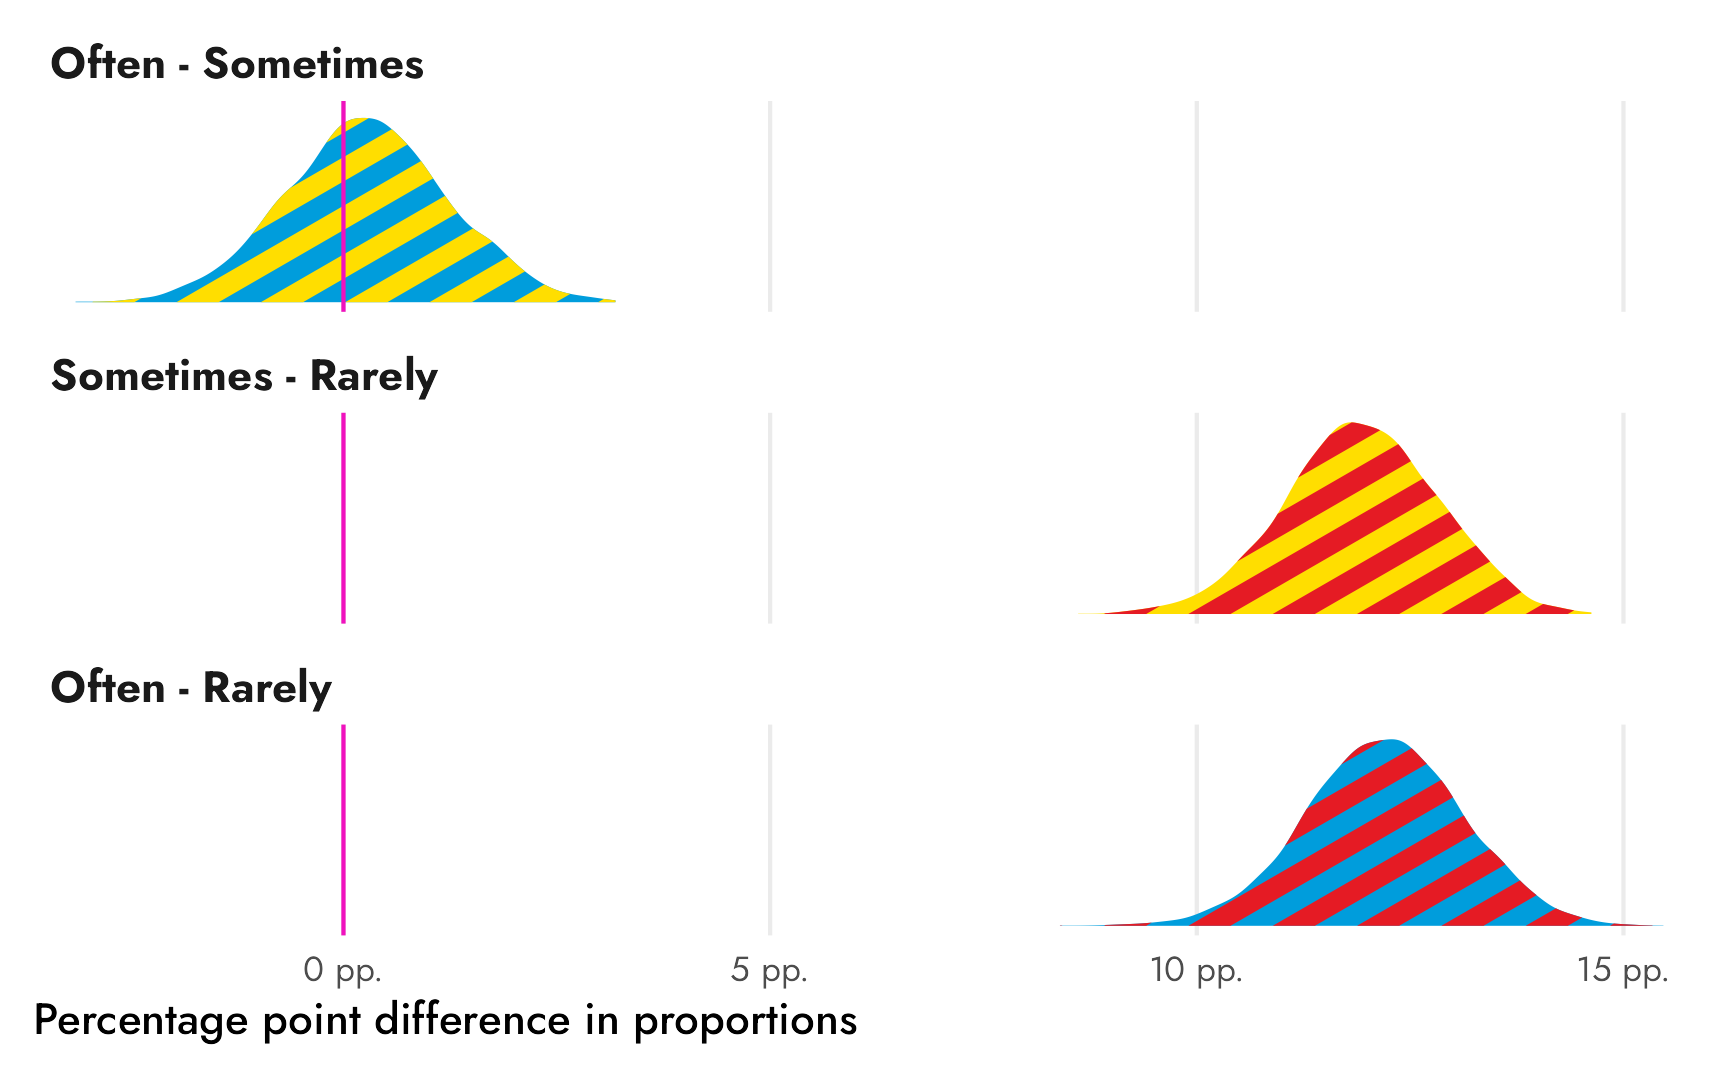 Posterior distributions of the differences between various frequencies of reading newspapers among American students; all density plots are filled with two stripes corresponding to the difference of their two categories